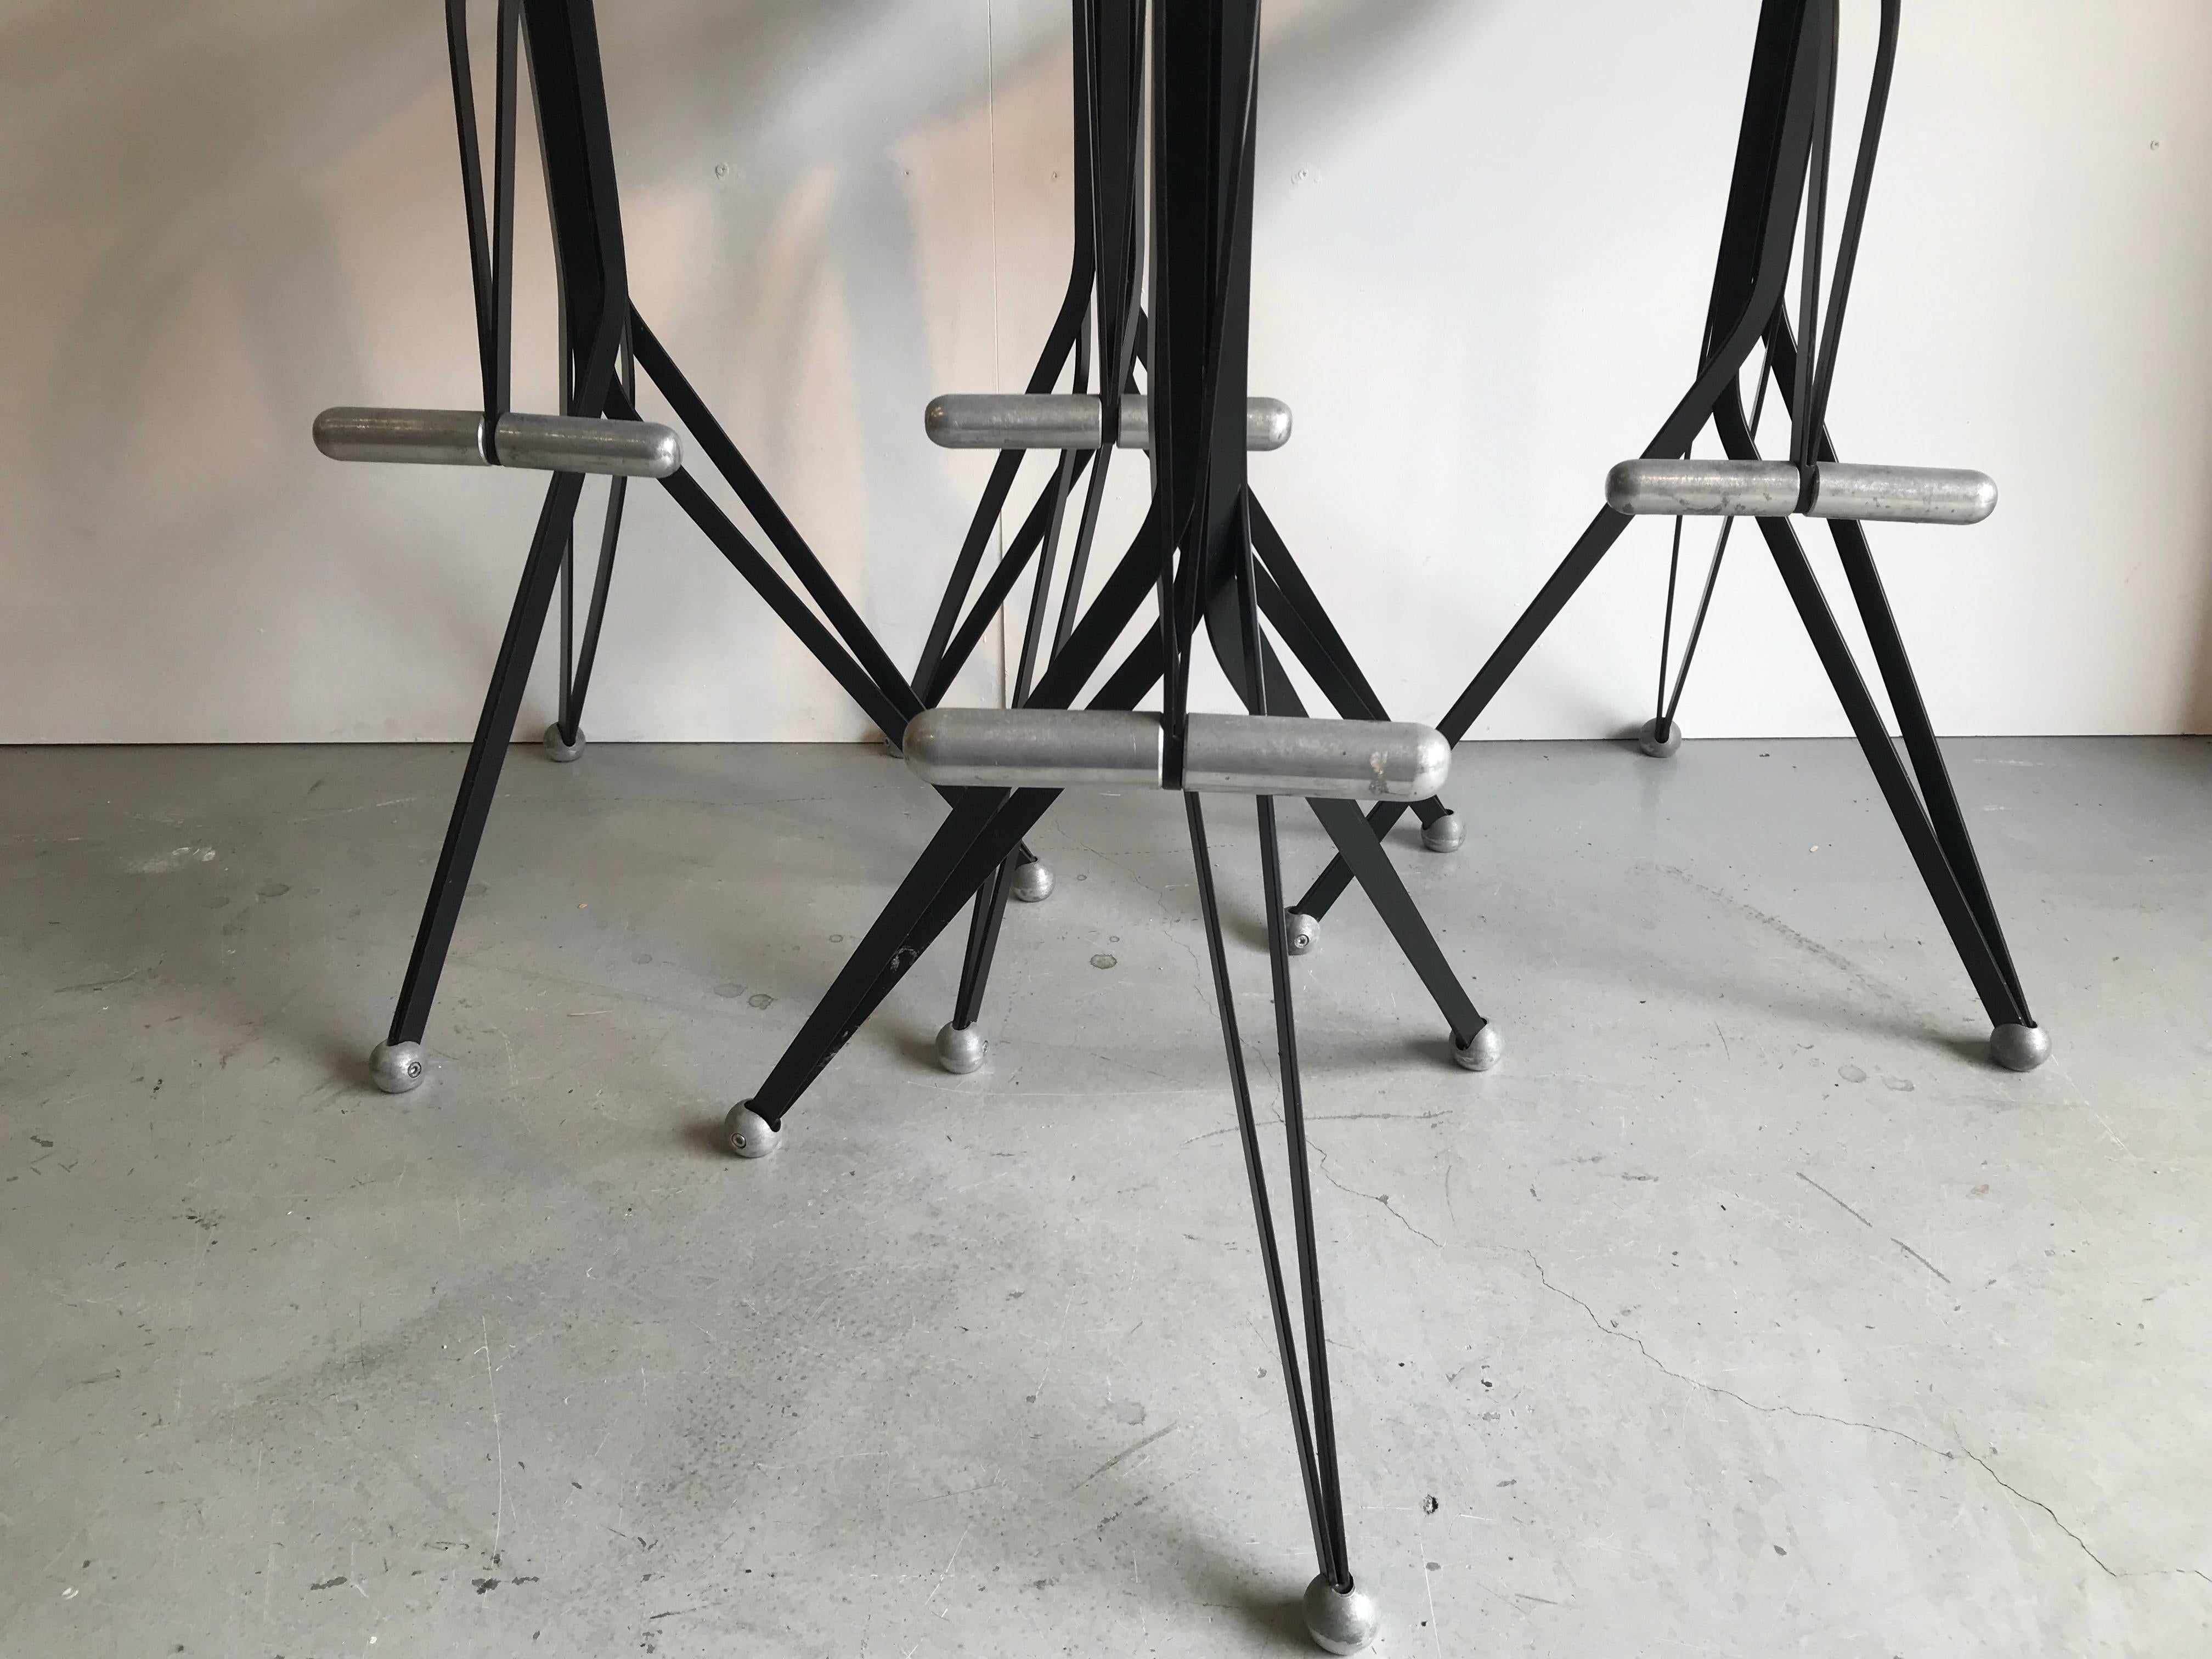 Four very rare barstools designed by Ron Arad for the Italian company ZEUS. Late 1980s design.
The stools are adjustable in height and turnable. They are surprisingly comfortable and you also have a footrest.
Black metal with aluminium details and